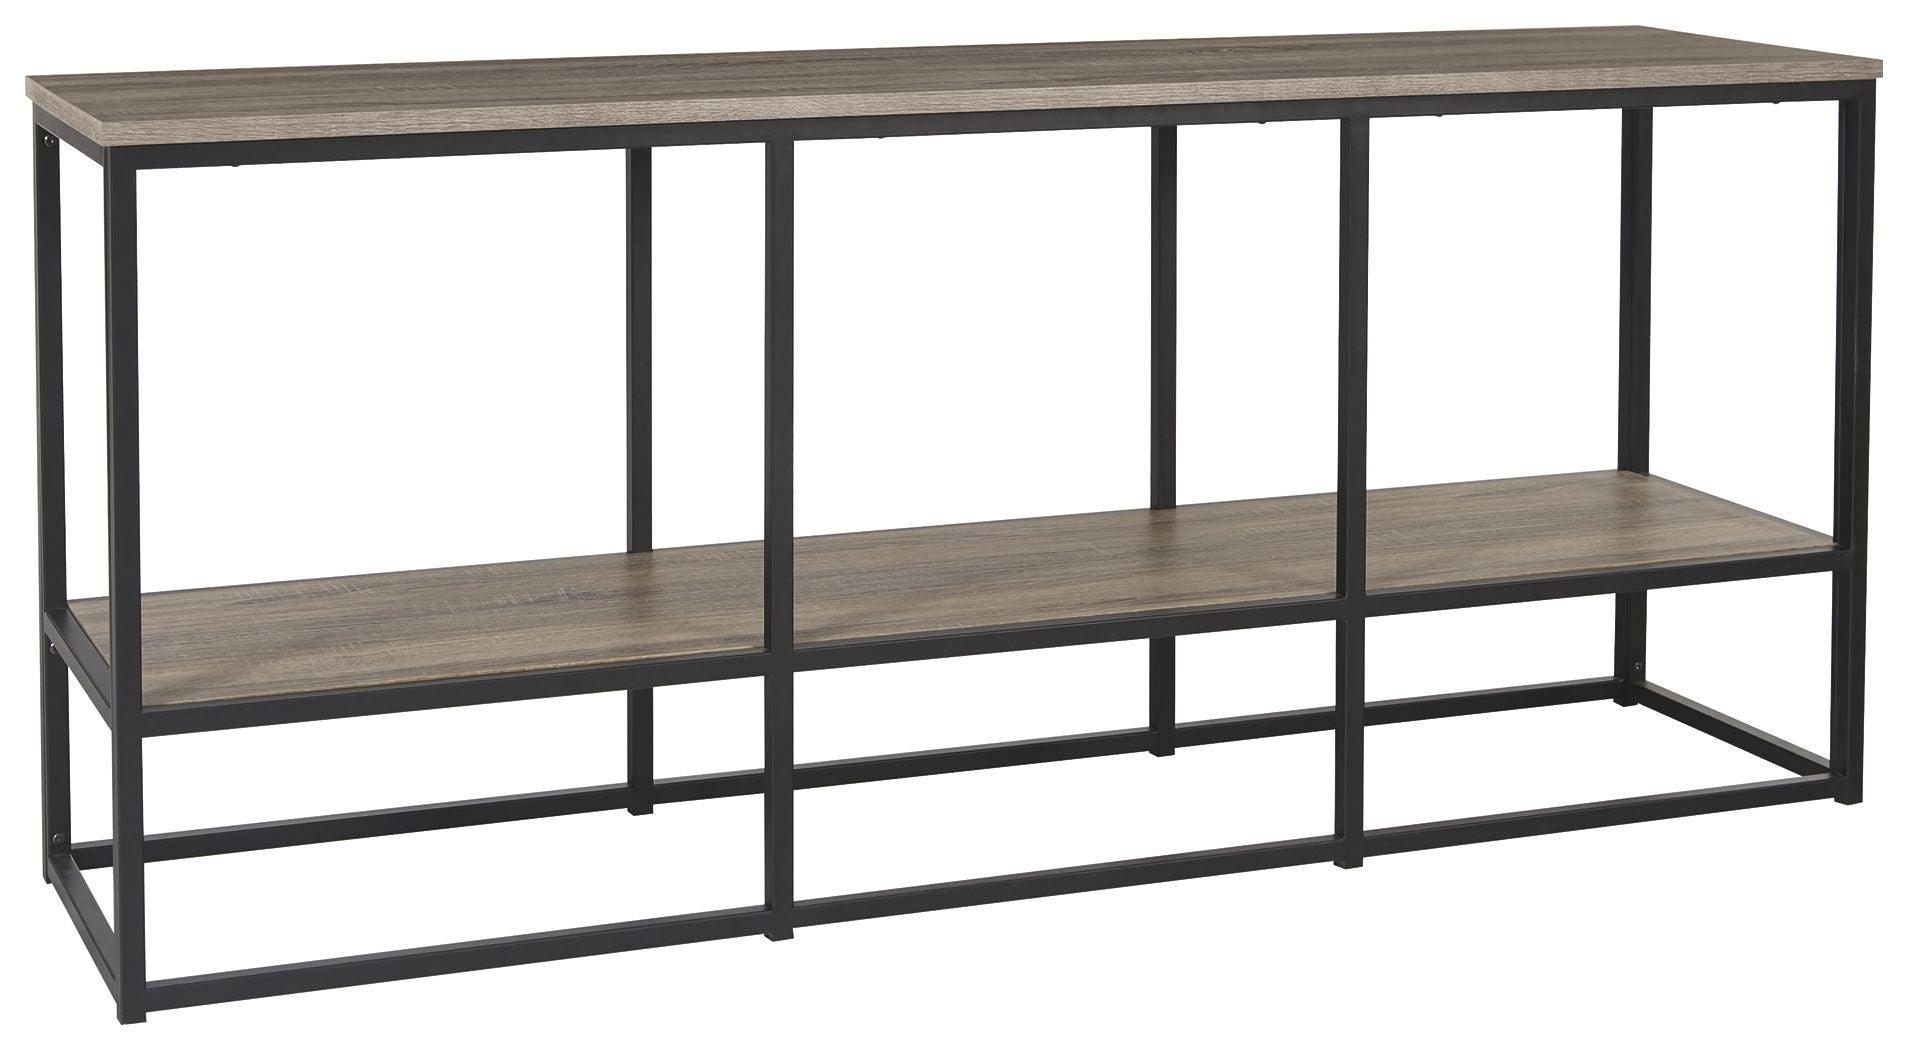 Ashley Furniture - Wadeworth - Brown / Black - Extra Large TV Stand - 5th Avenue Furniture